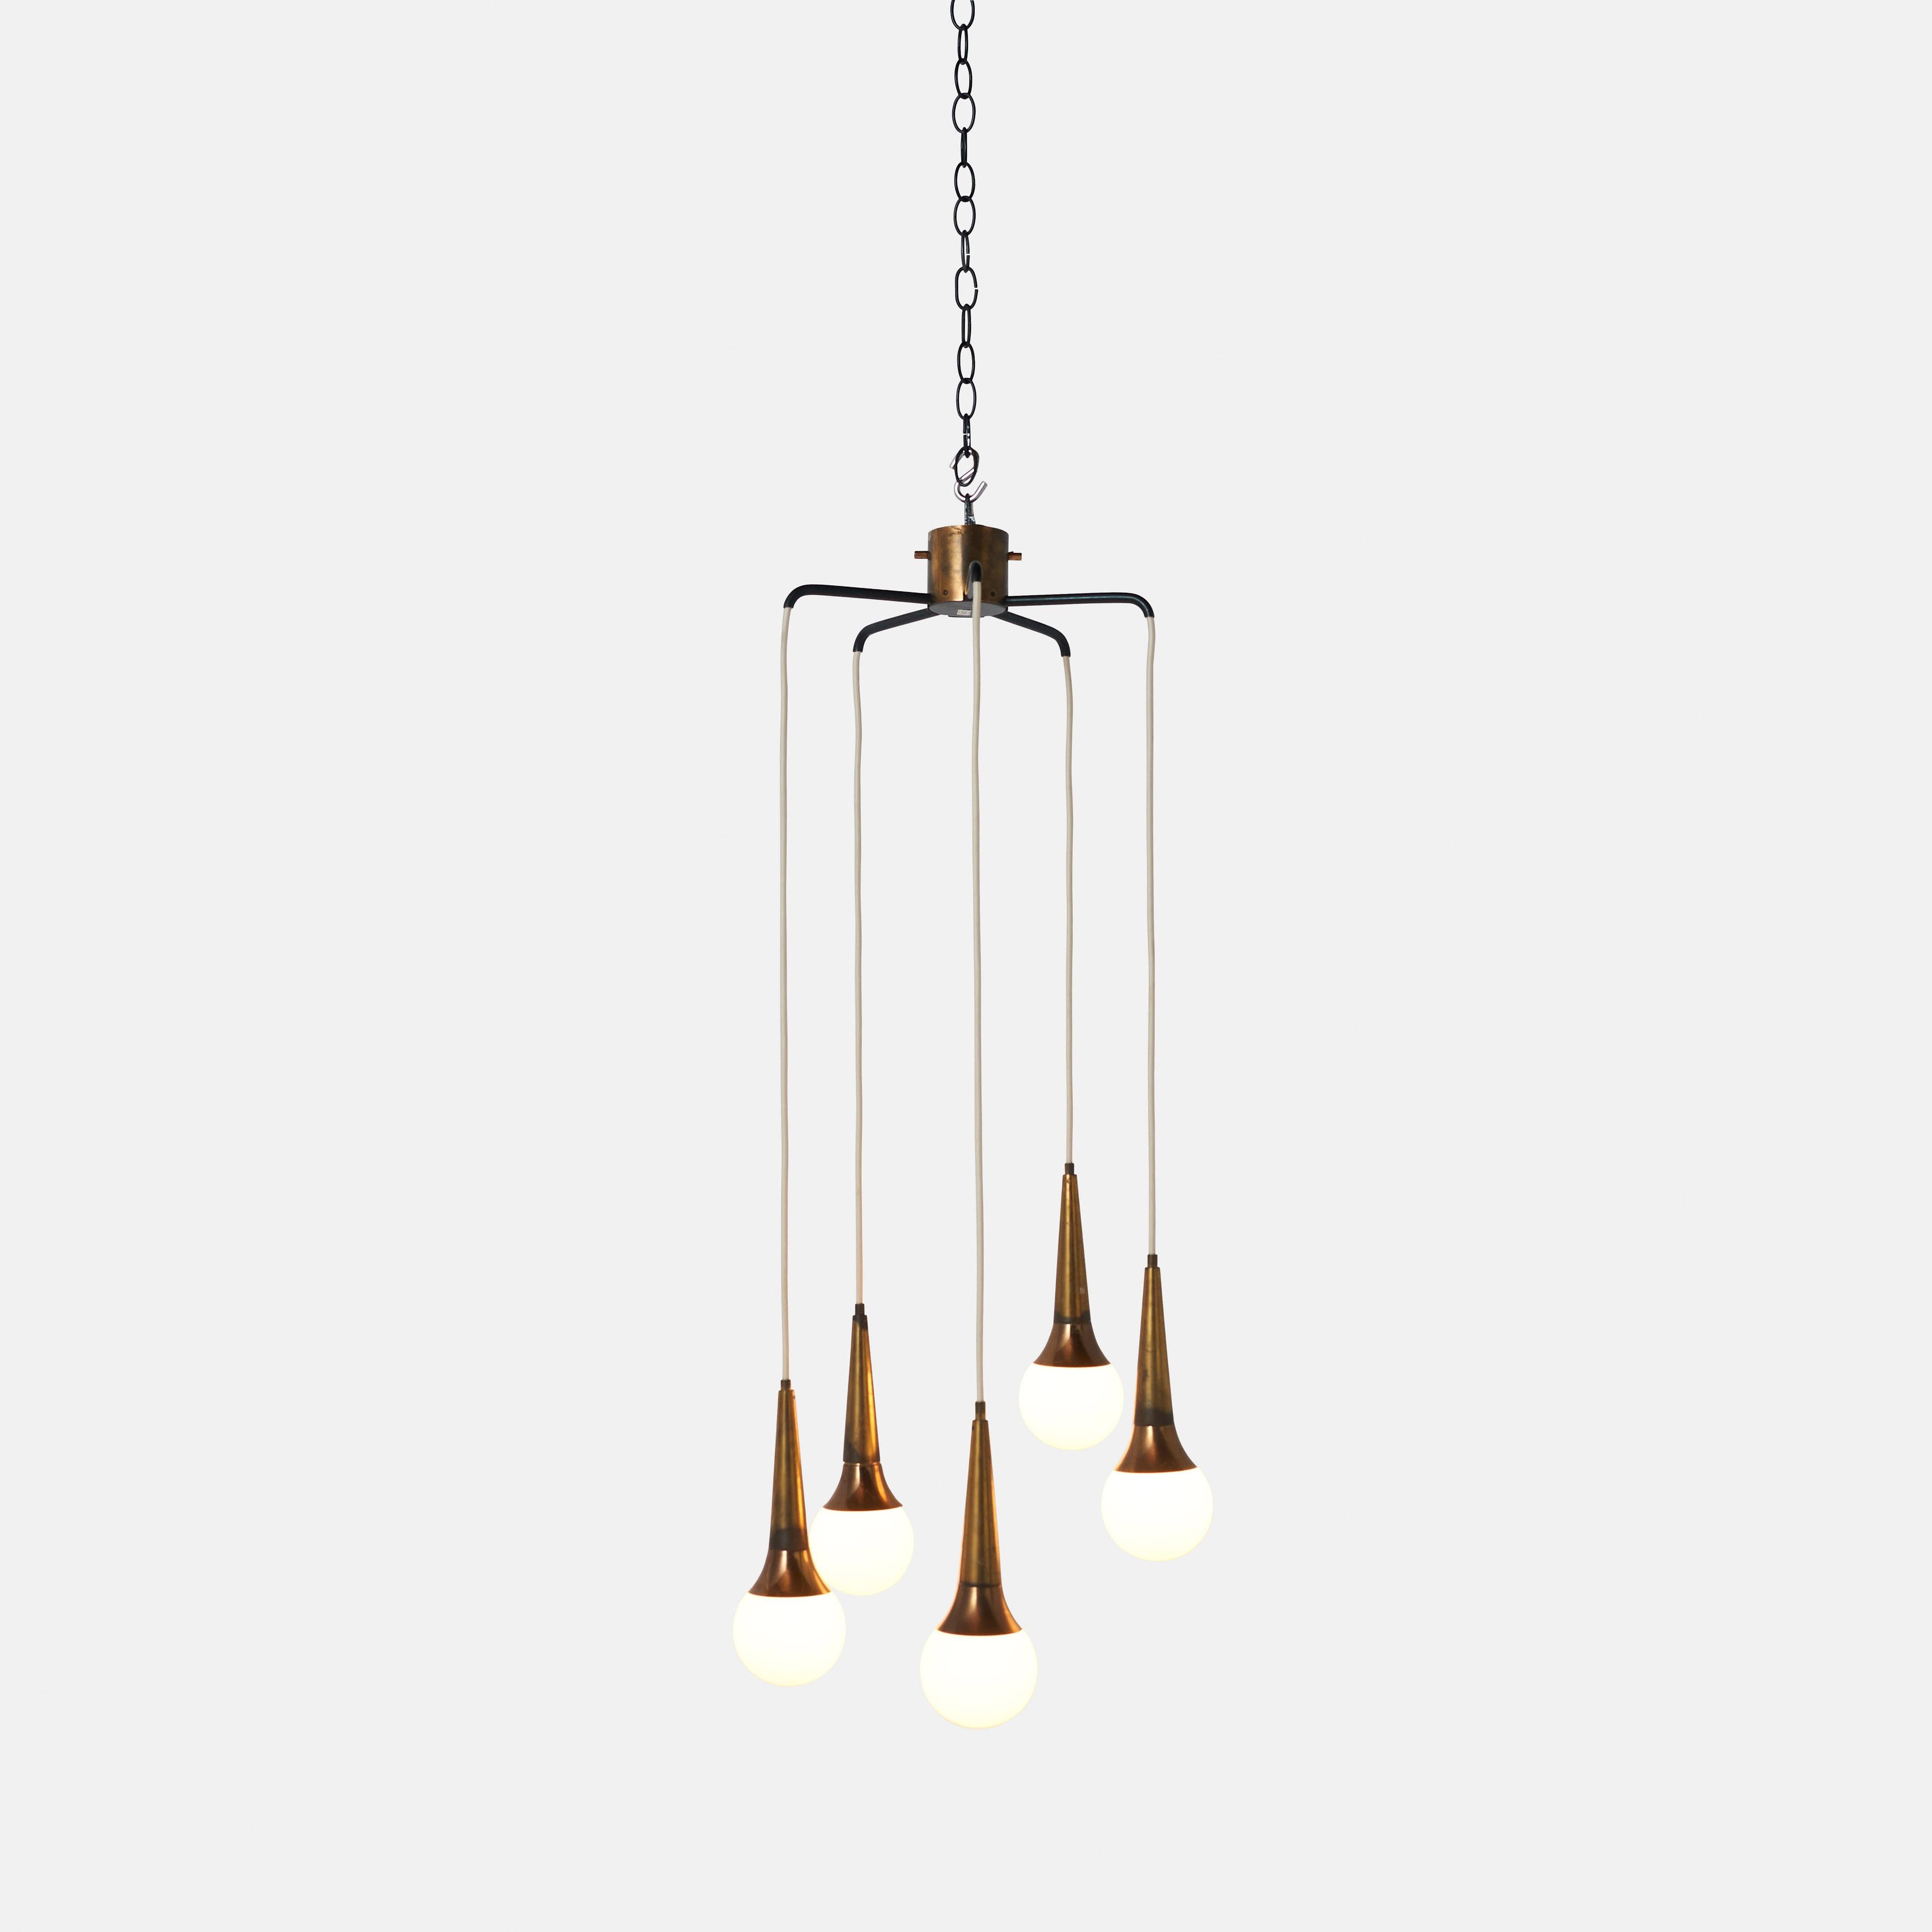 A cascading chandelier produced by Stilnovo in the late 1950s or early 1960's. Featuring five teardrop balls of frosted Murano glass dripping from a brass frame in a multi-level display. Creates a warm aura with interesting shadows when lit.